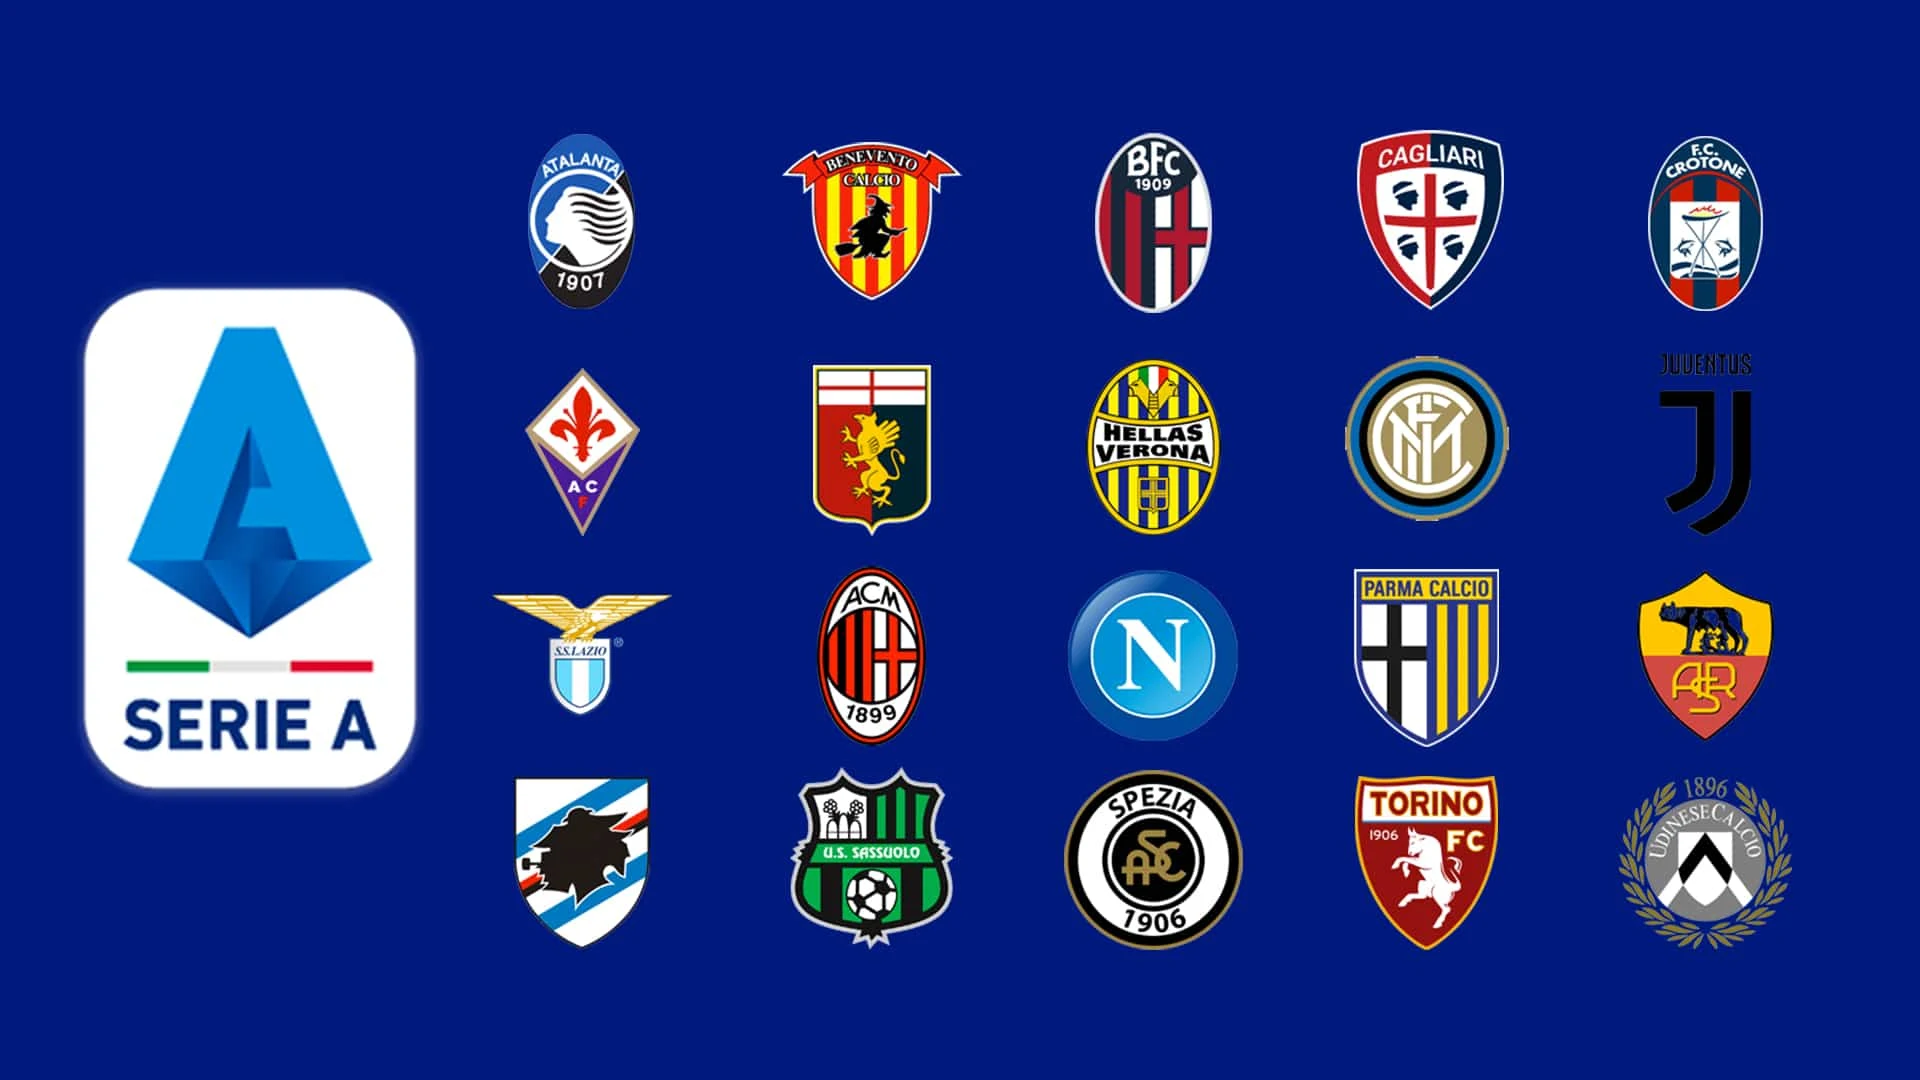 The top clubs in Italy